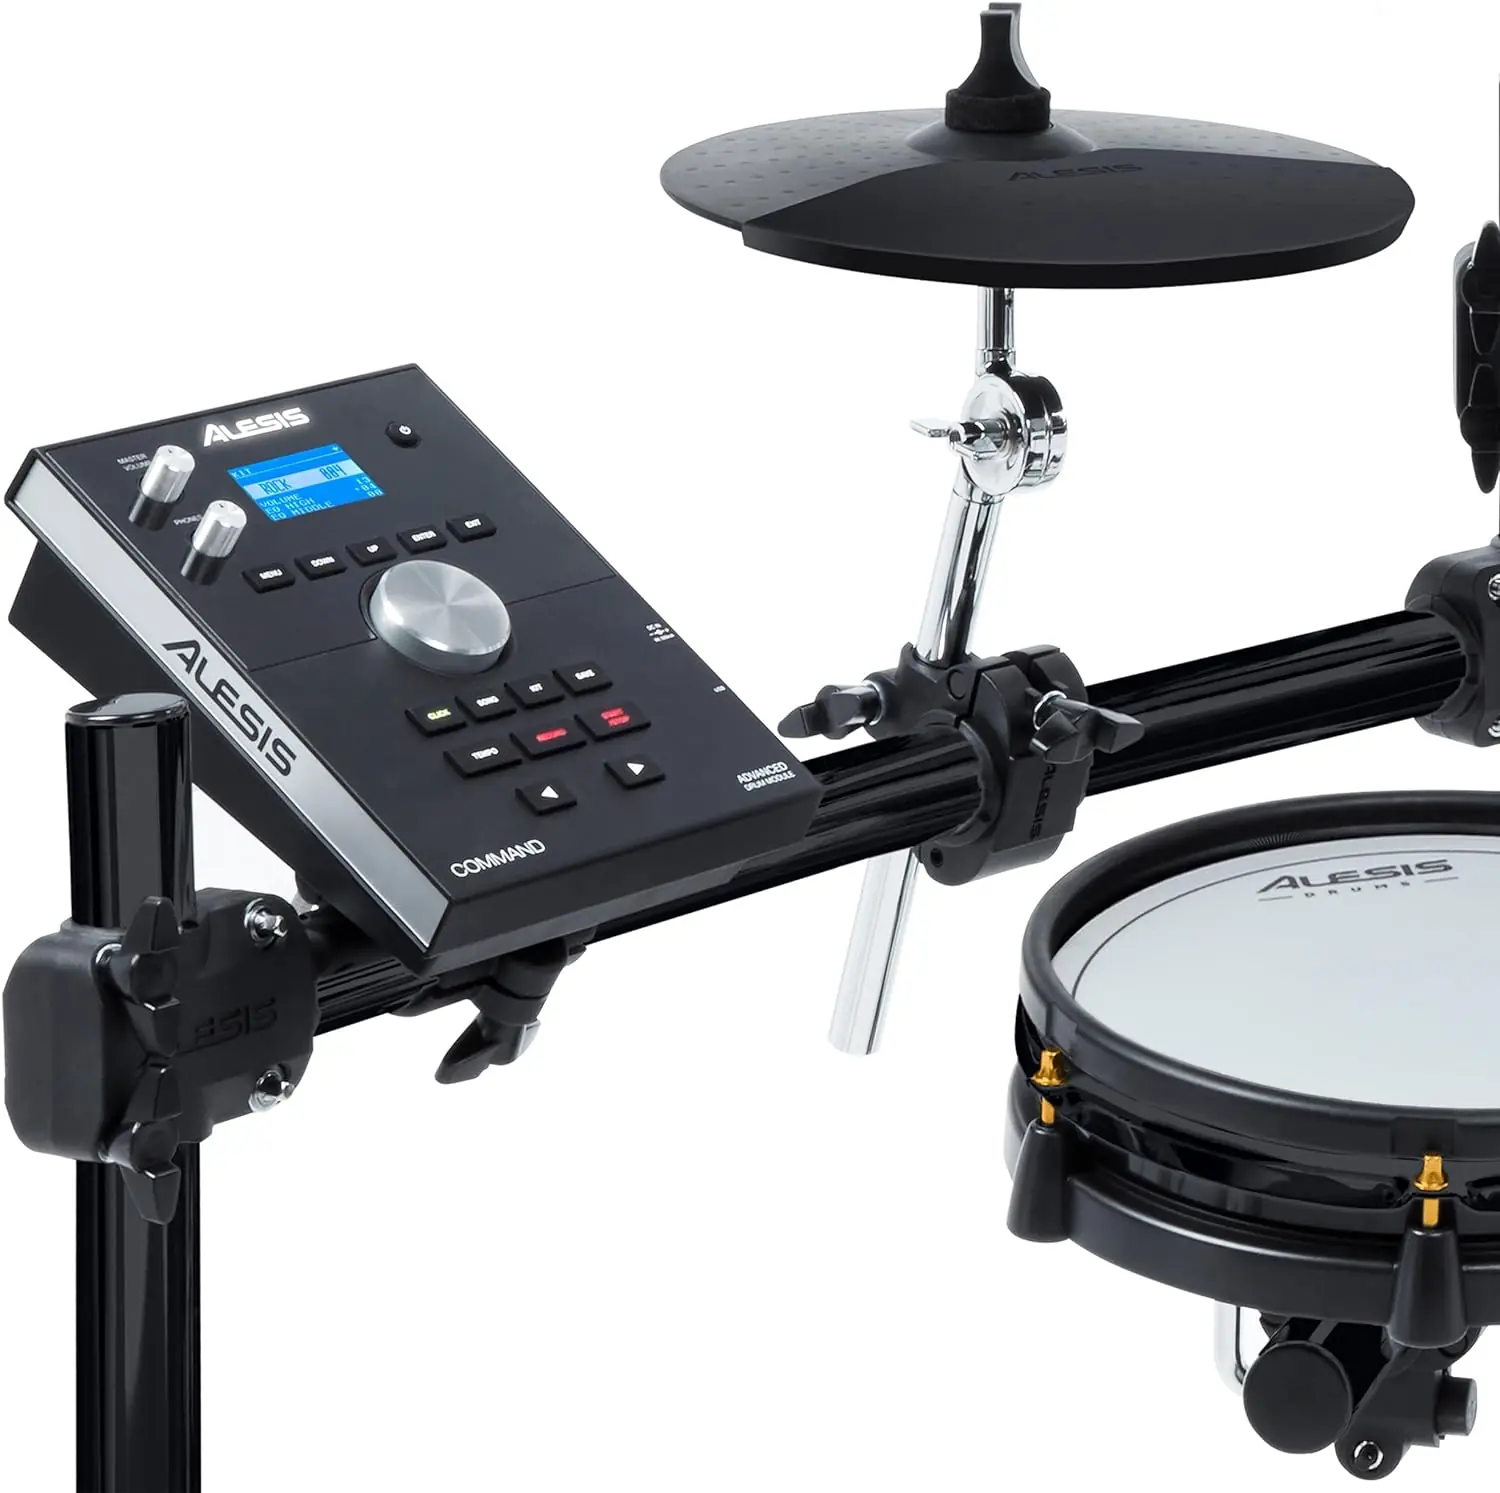 Pads Alesis Command